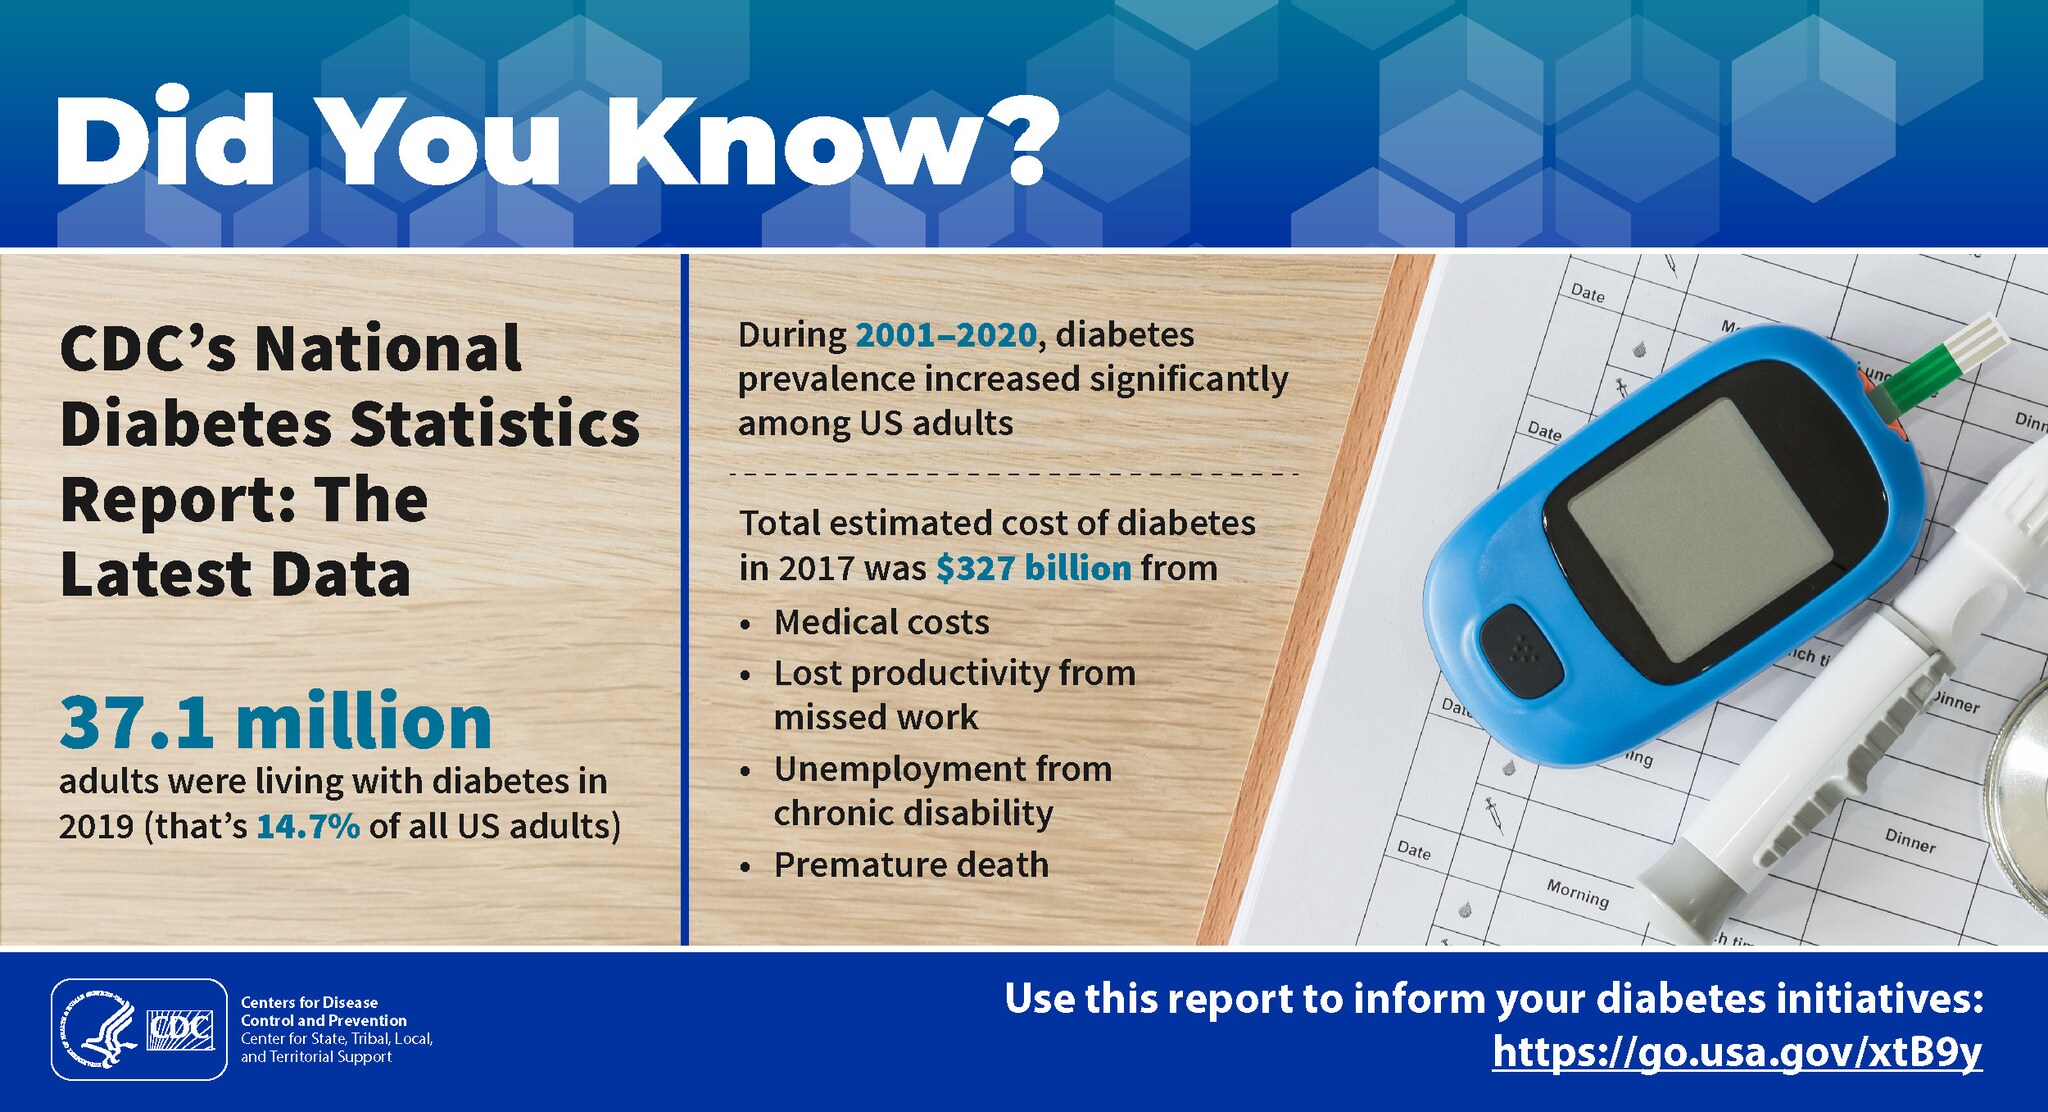 Did You Know? CDC’s National Diabetes Statistics Report: The Latest Data. During 2001–2020, diabetes prevalence increased significantly among US adults. 37.1 million adults were living with diabetes in 2019—that’s 14.7% of all US adults. Total estimated cost of diabetes in 2017 was about $327 billion from medical costs, lost productivity from missed work, unemployment from chronic disability, and premature death. Use this new report to inform your diabetes initiatives: https://go.usa.gov/xtB9y